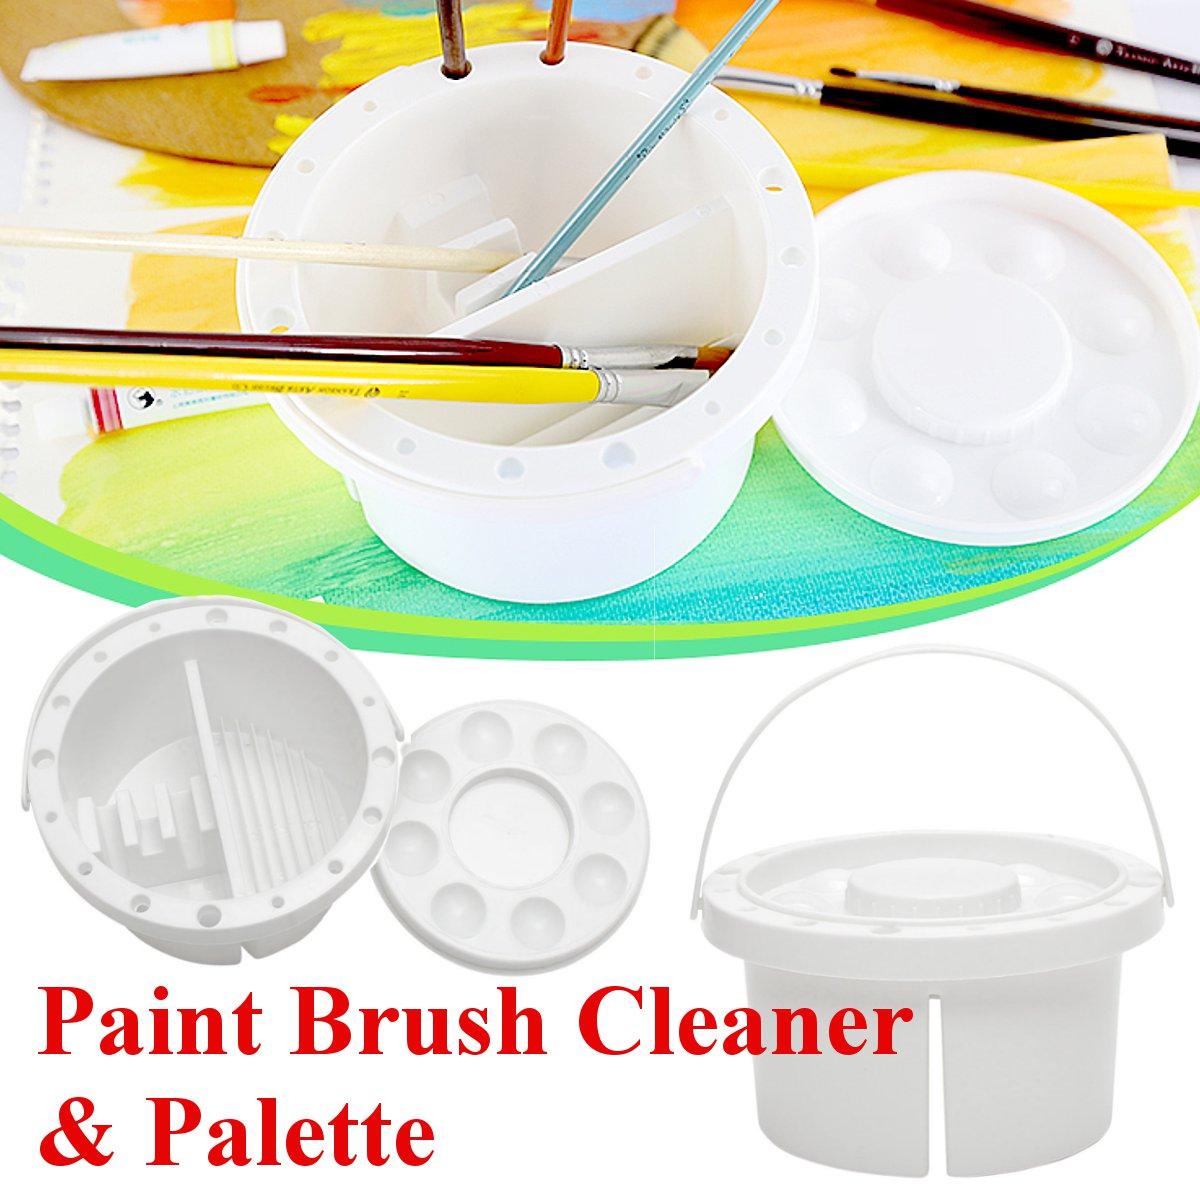 Plastic Paint Brush Washer & Storage Tub with Cicular Palette